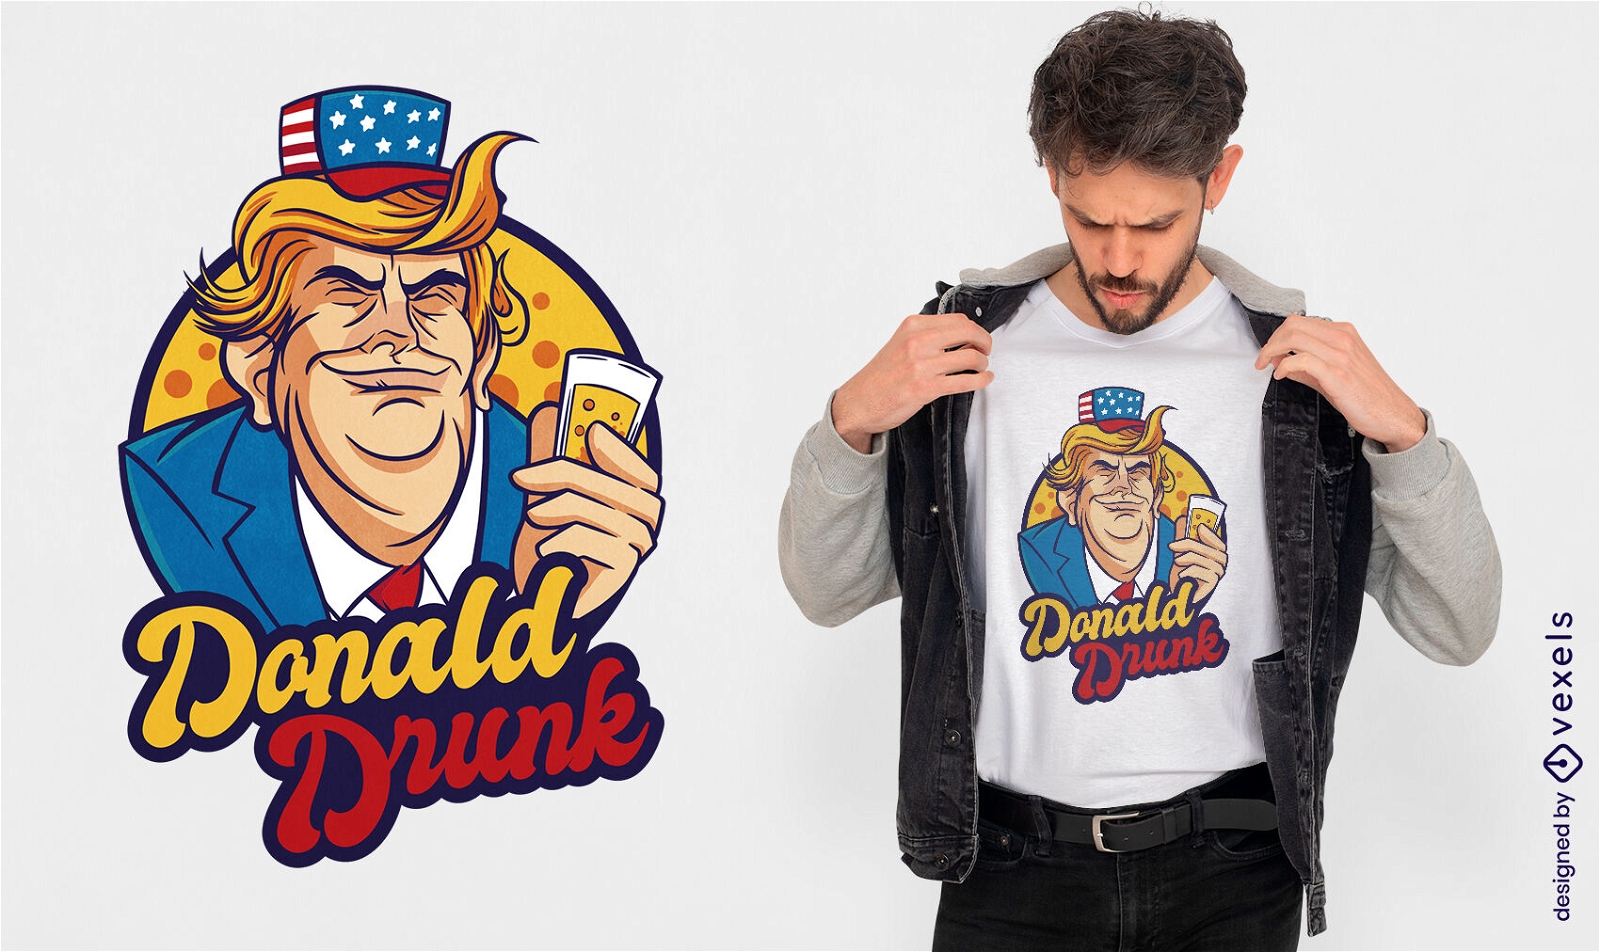 Donald trip with beer t-shirt design